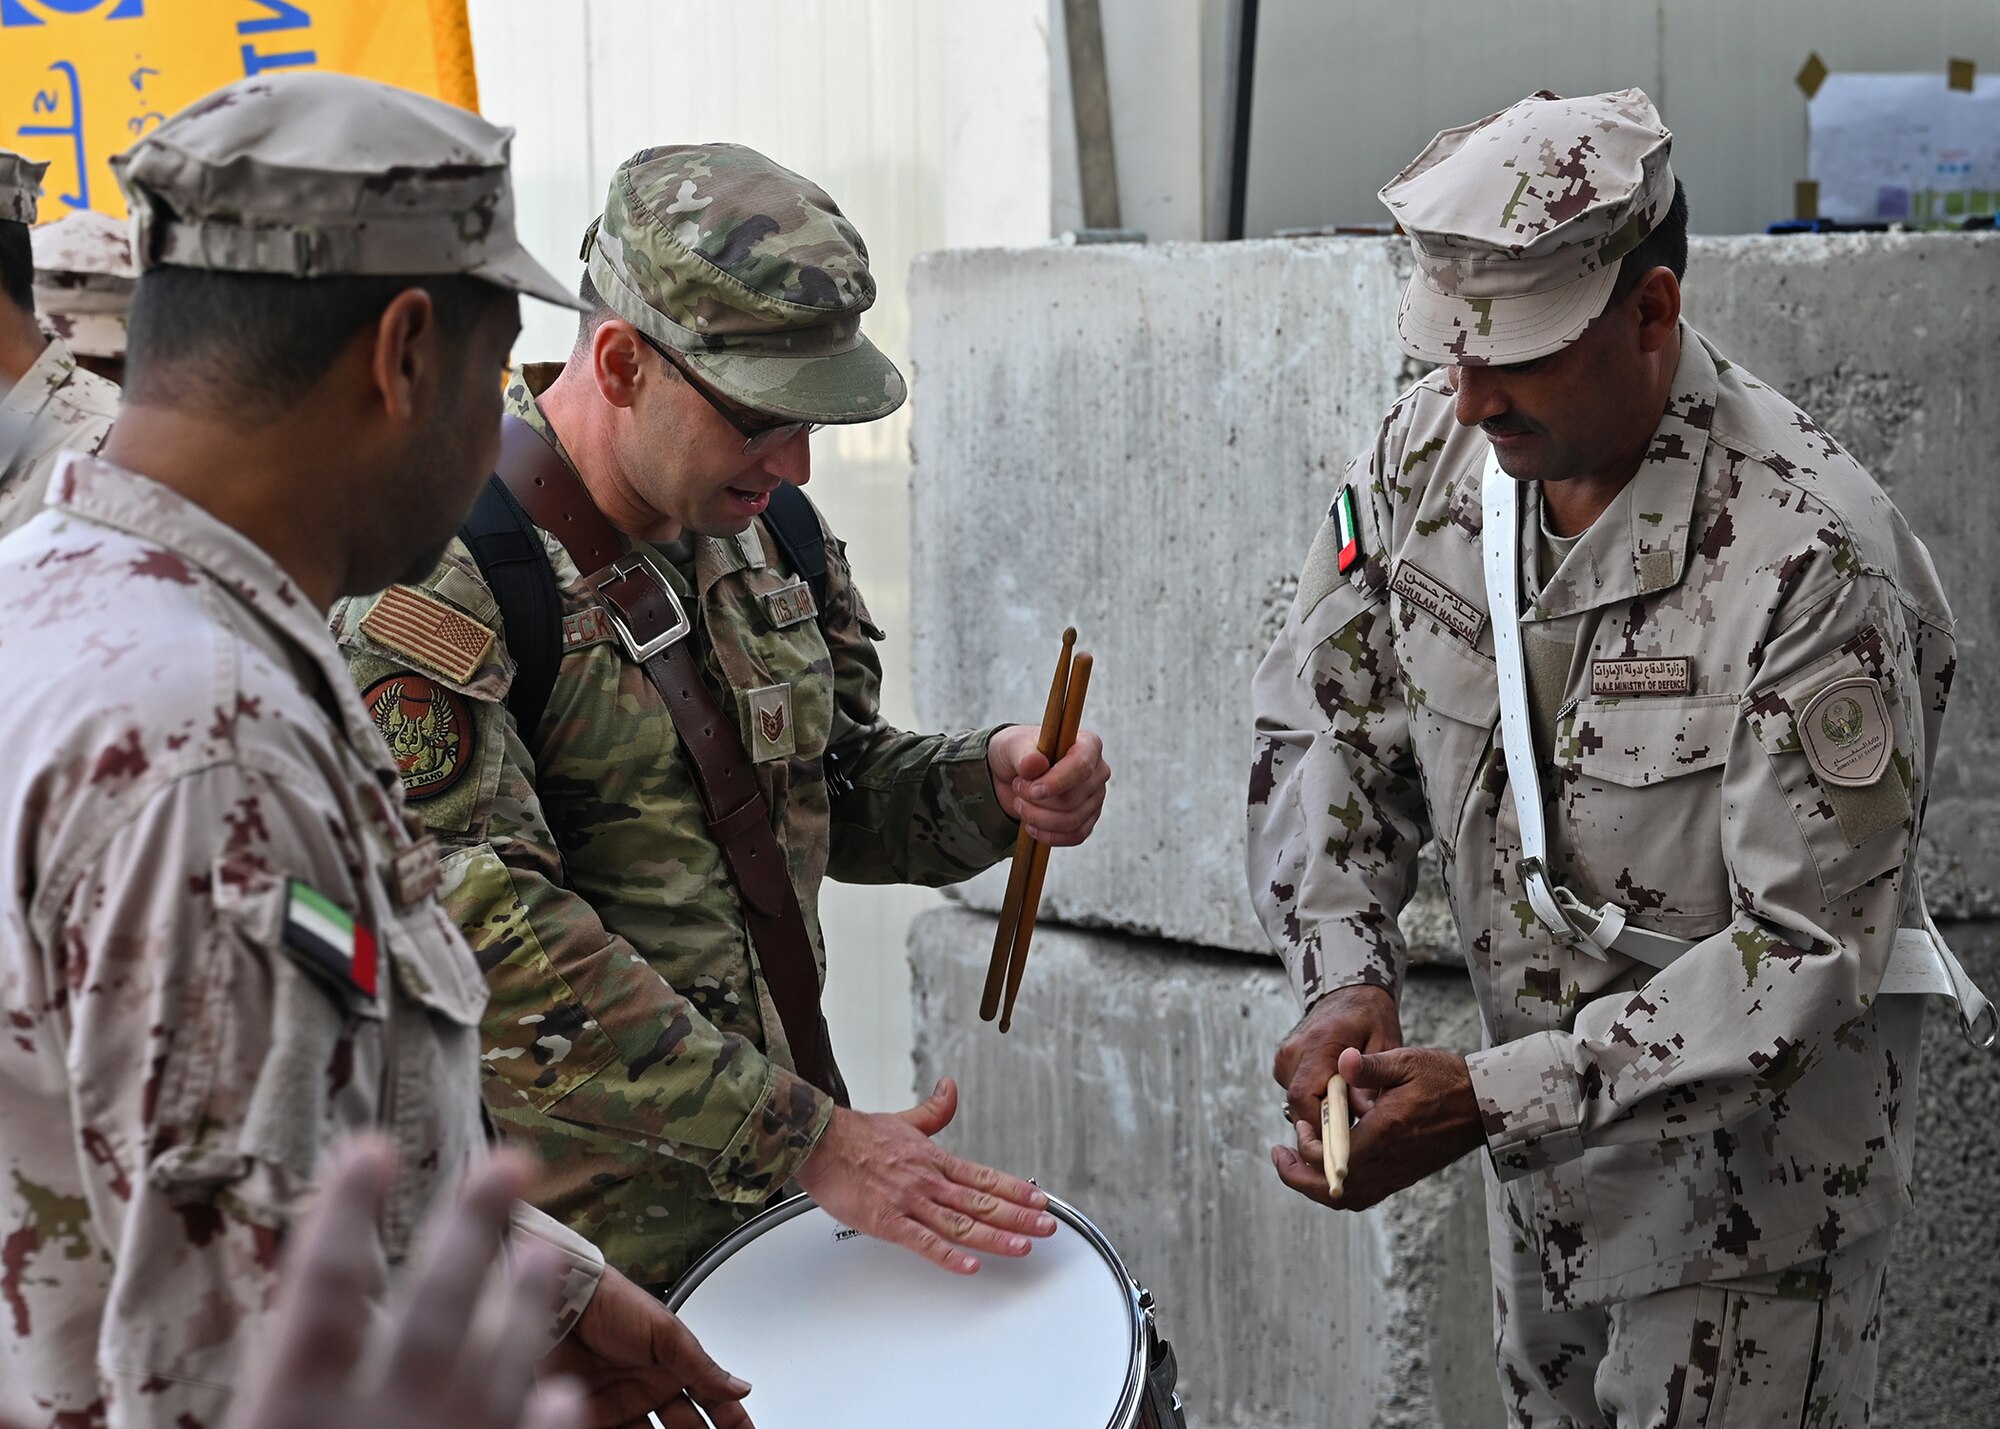 US and UAE band service members interact.